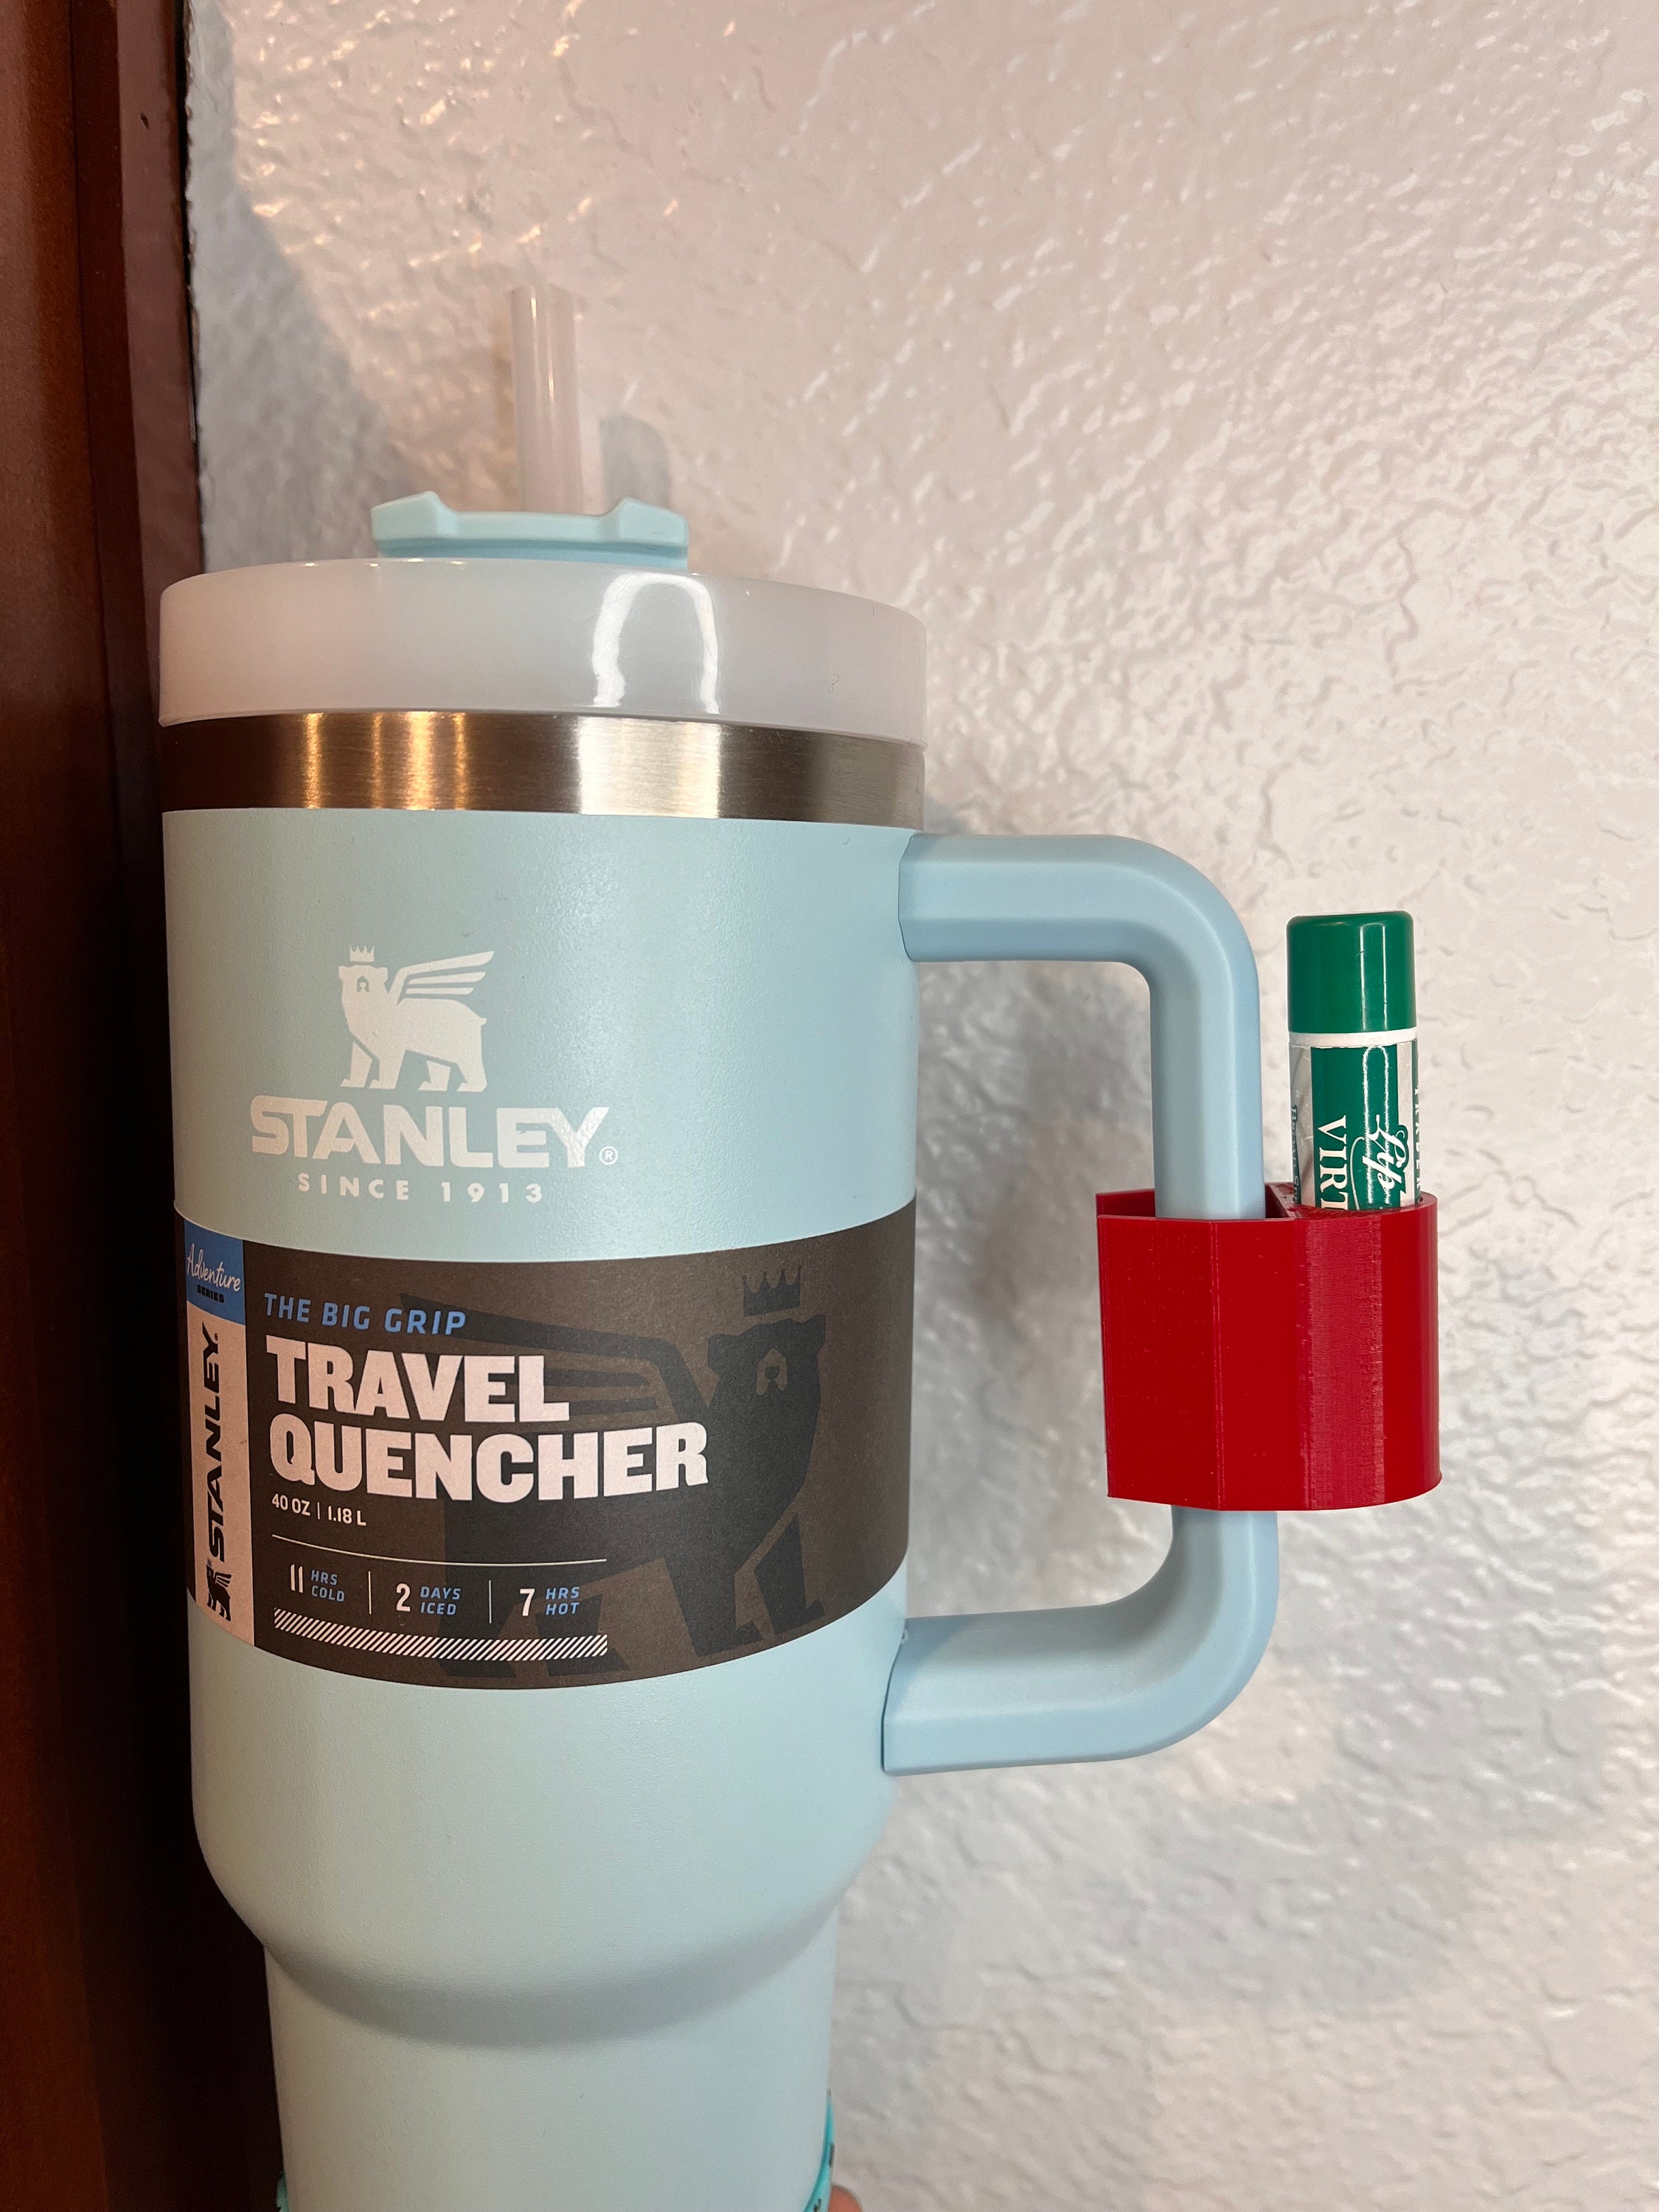 Cup 40 Oz Tumbler Chapstick Keychain Holder - 2 In 1 Holder Fits For Stanley  40 Oz Tumbler Cup